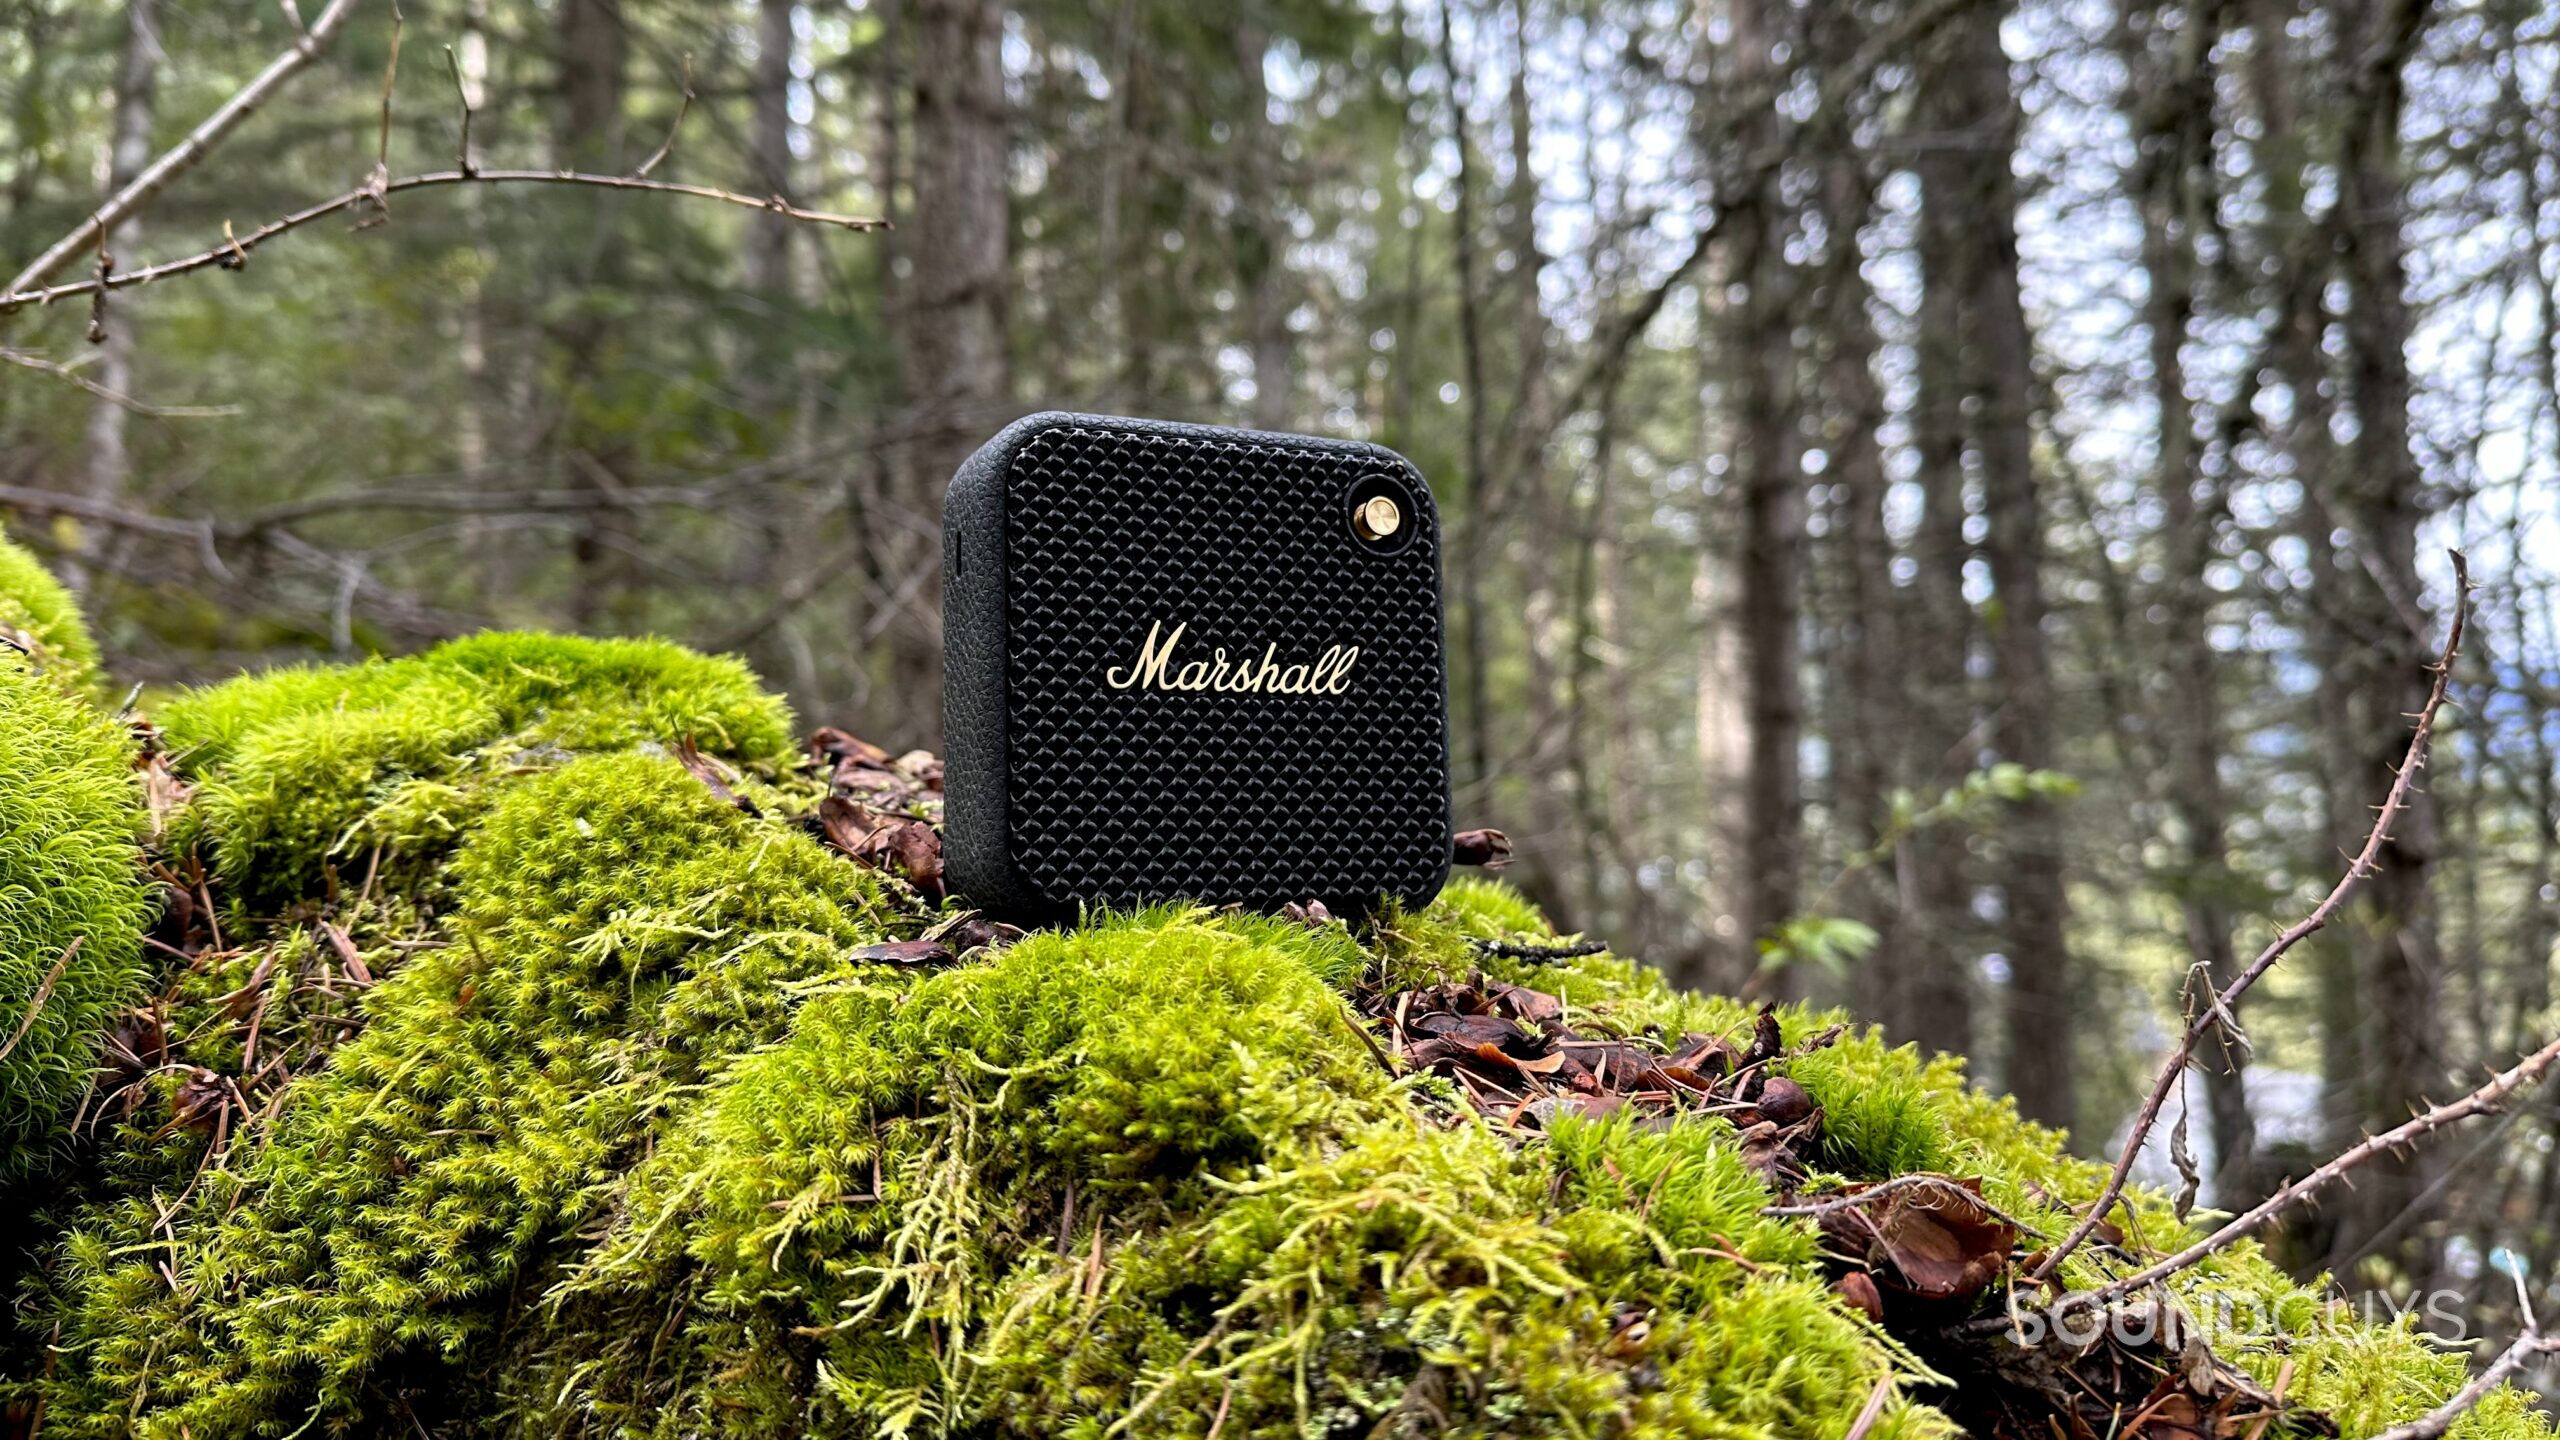 A Marshall Willem speaker atop a mossy rock in the forest.